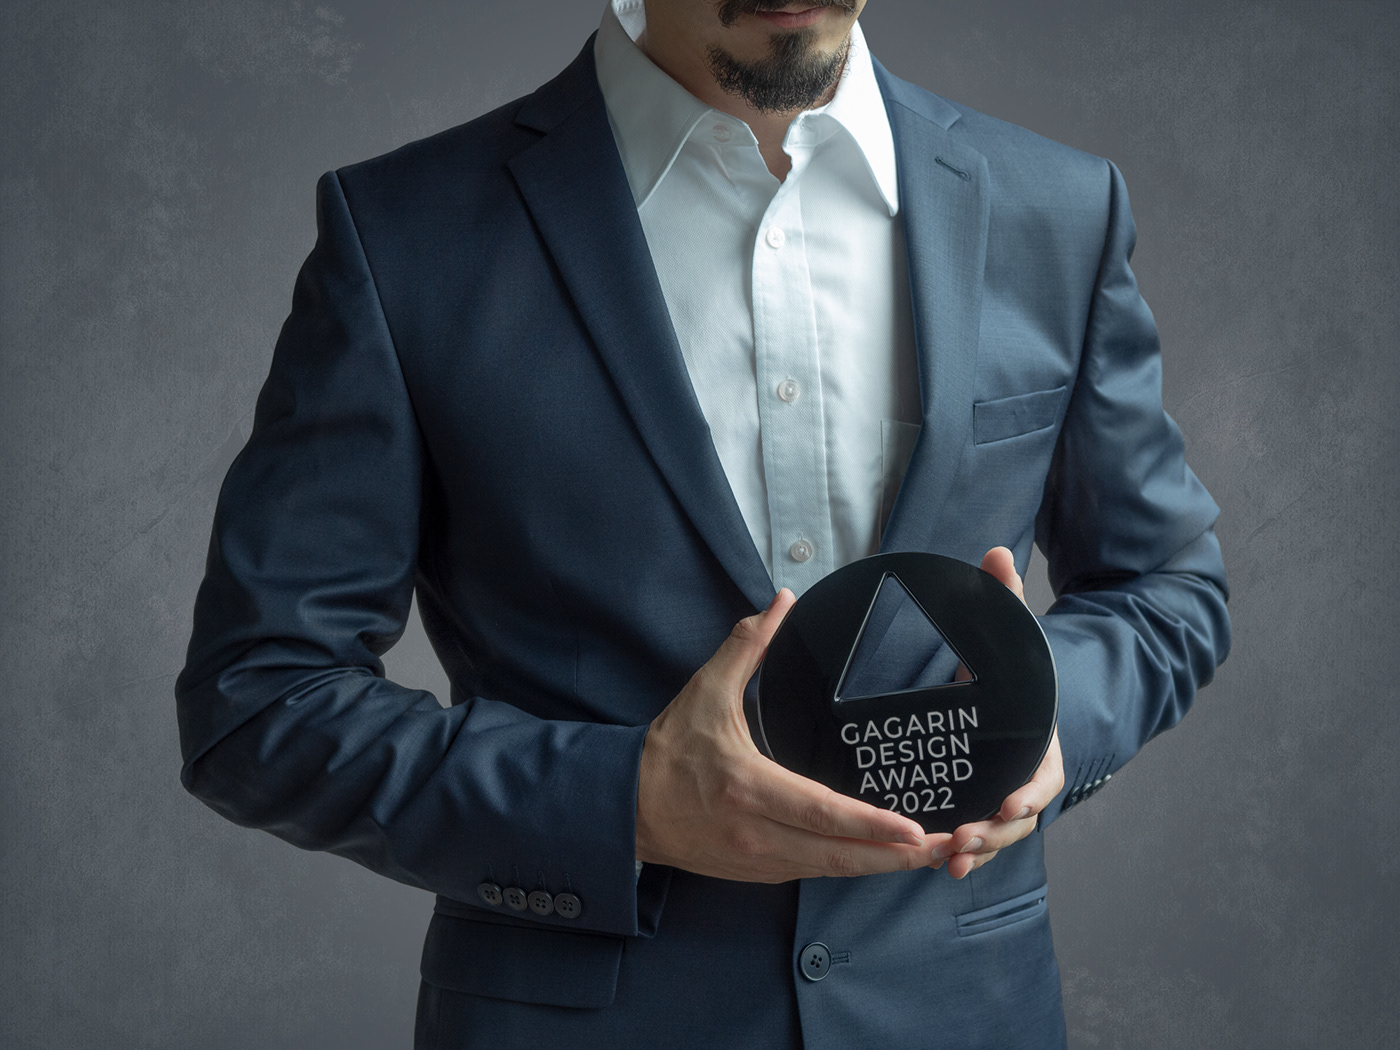 A men with an award in hands